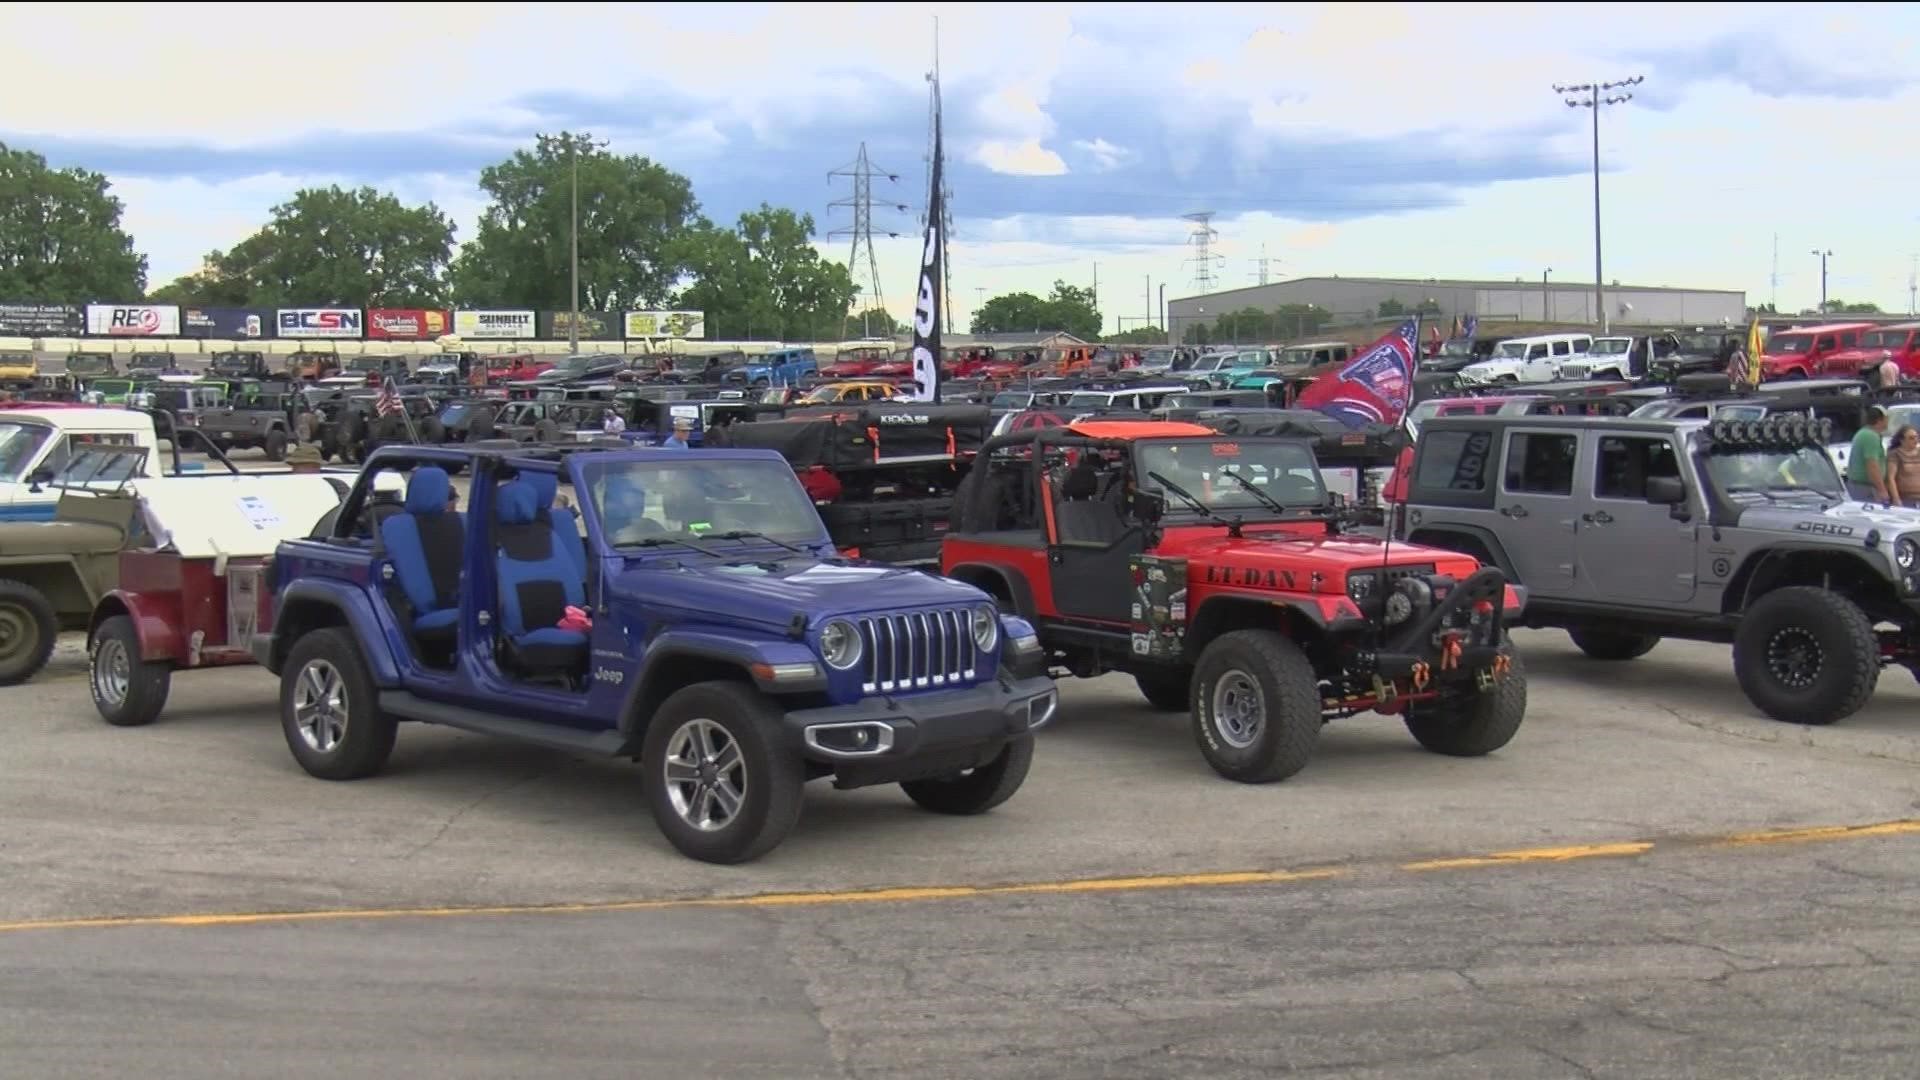 Jeep Fest Hype Bash Friday at Toledo Speedway Friday got folks excited for Aug. 12-14 Jeep Fest.